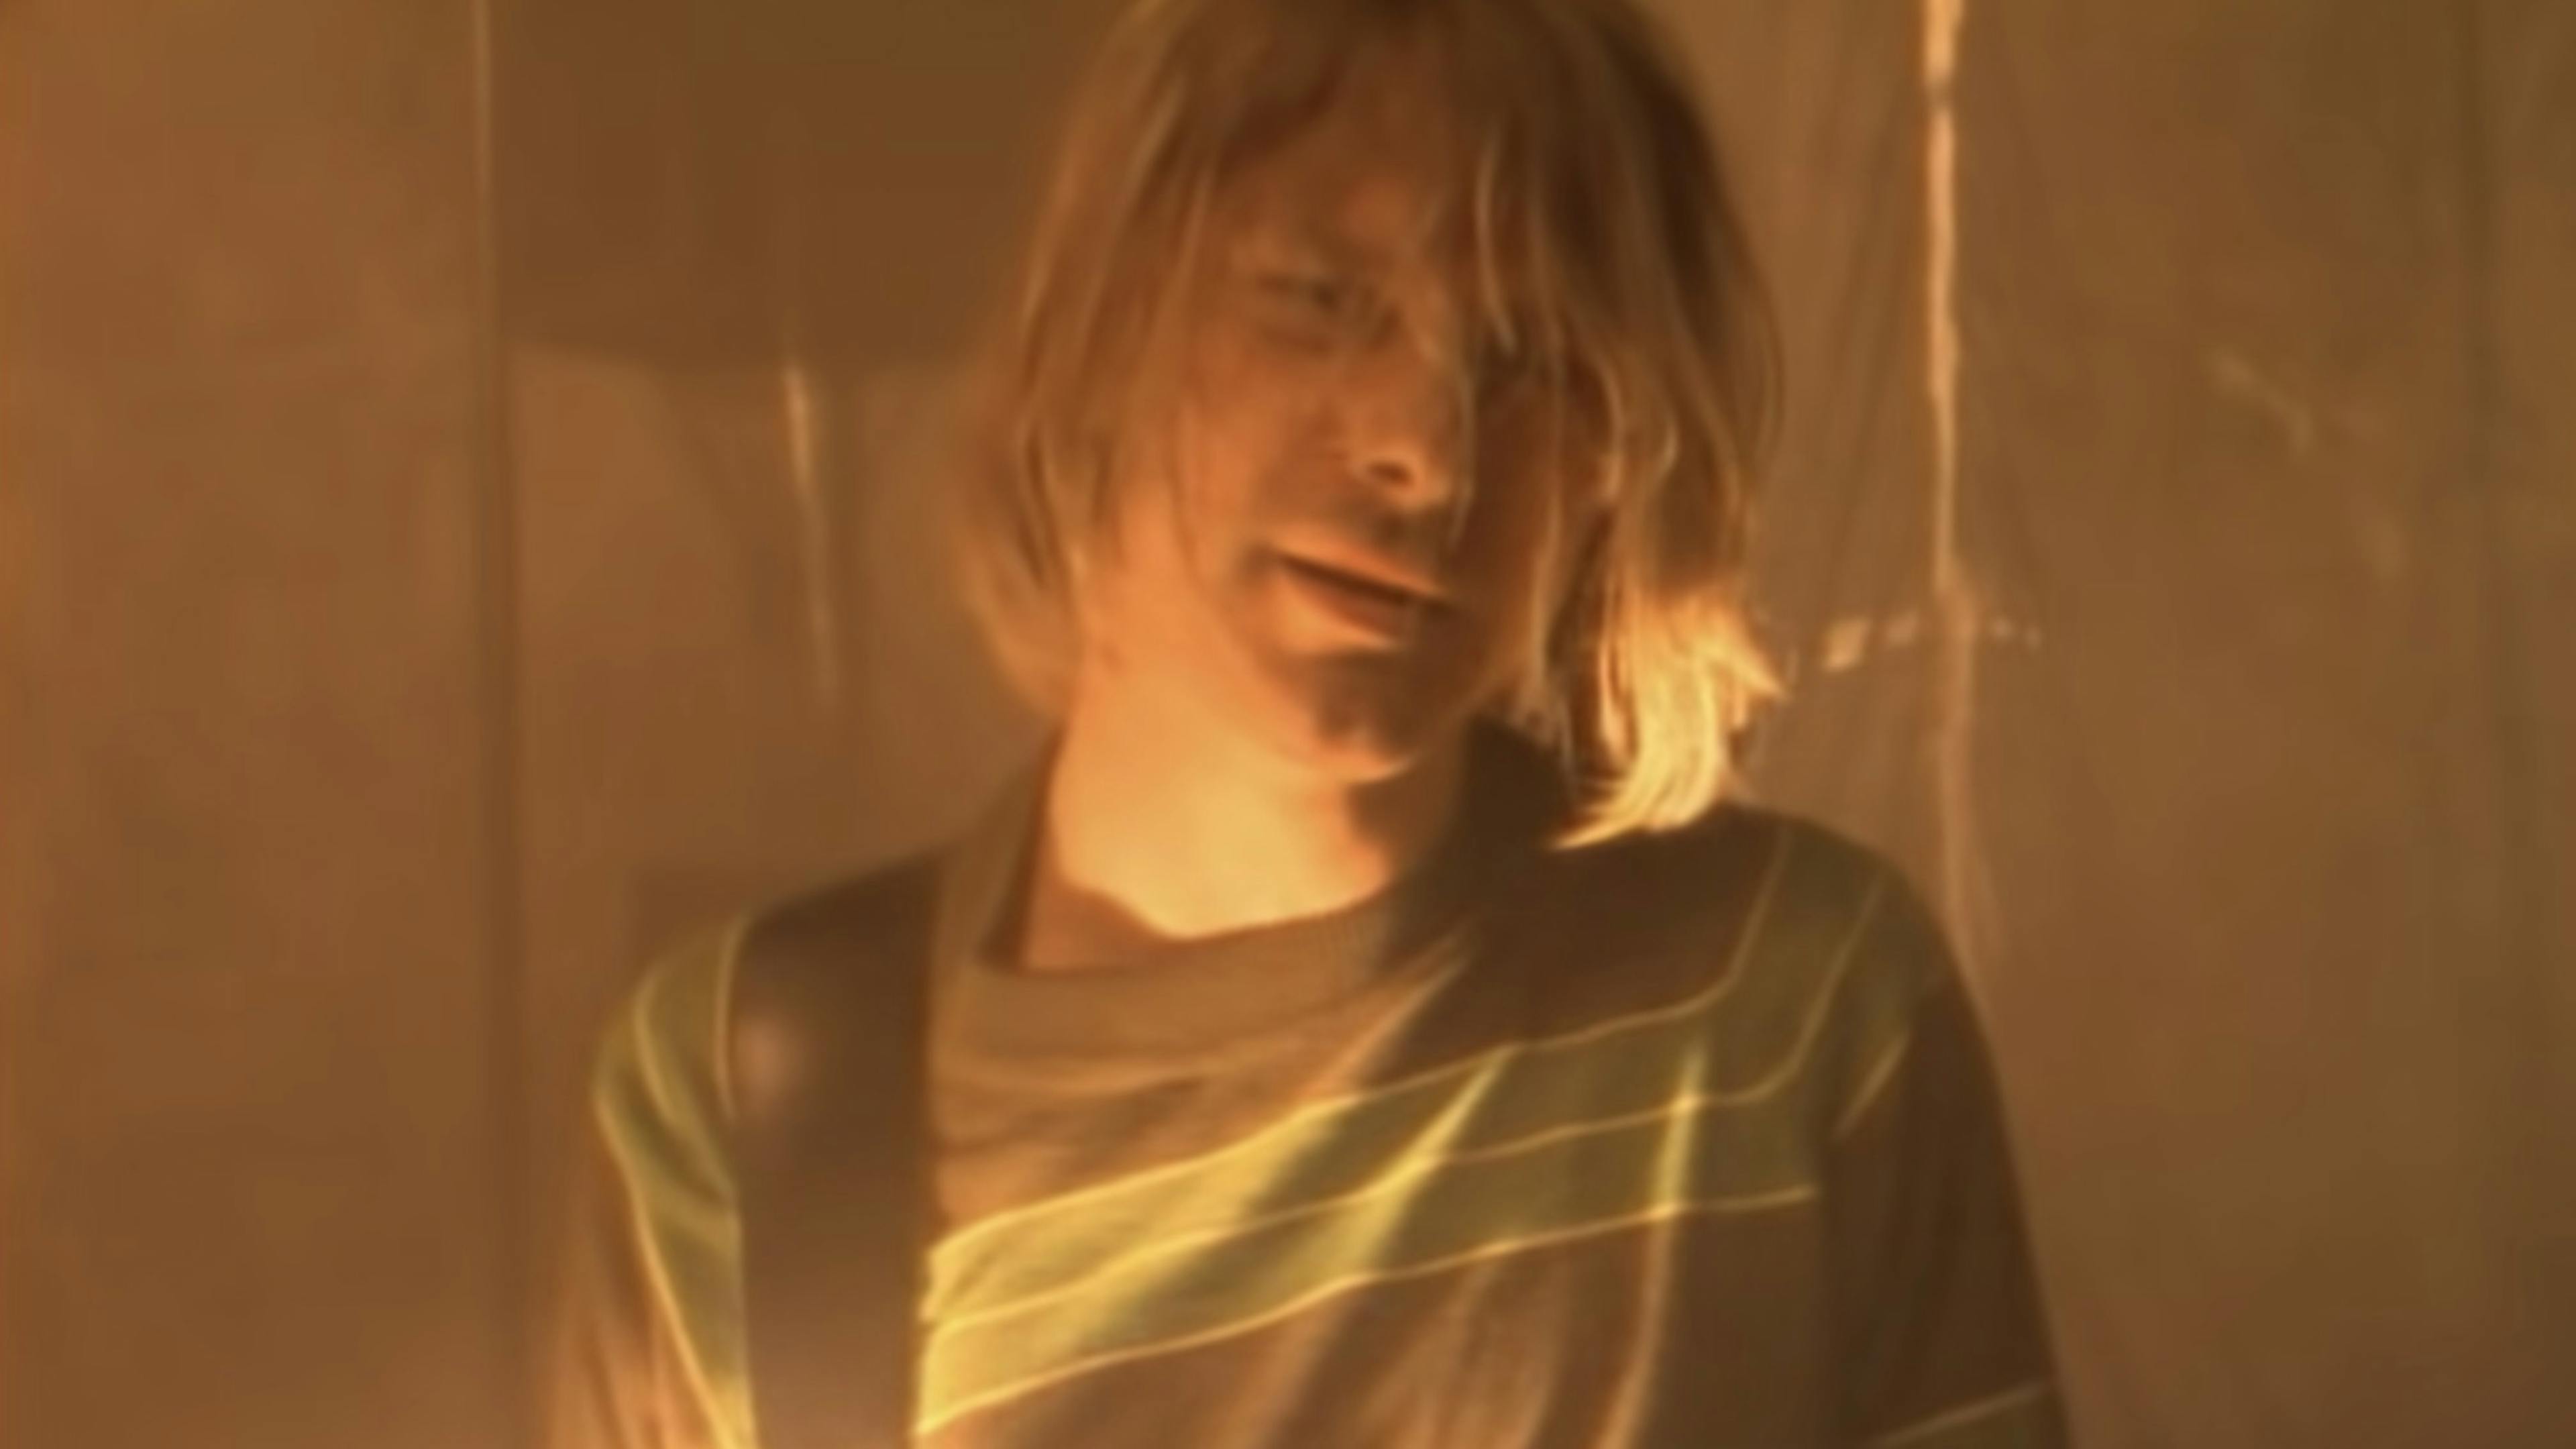 You can now buy six strands of Kurt Cobain’s hair